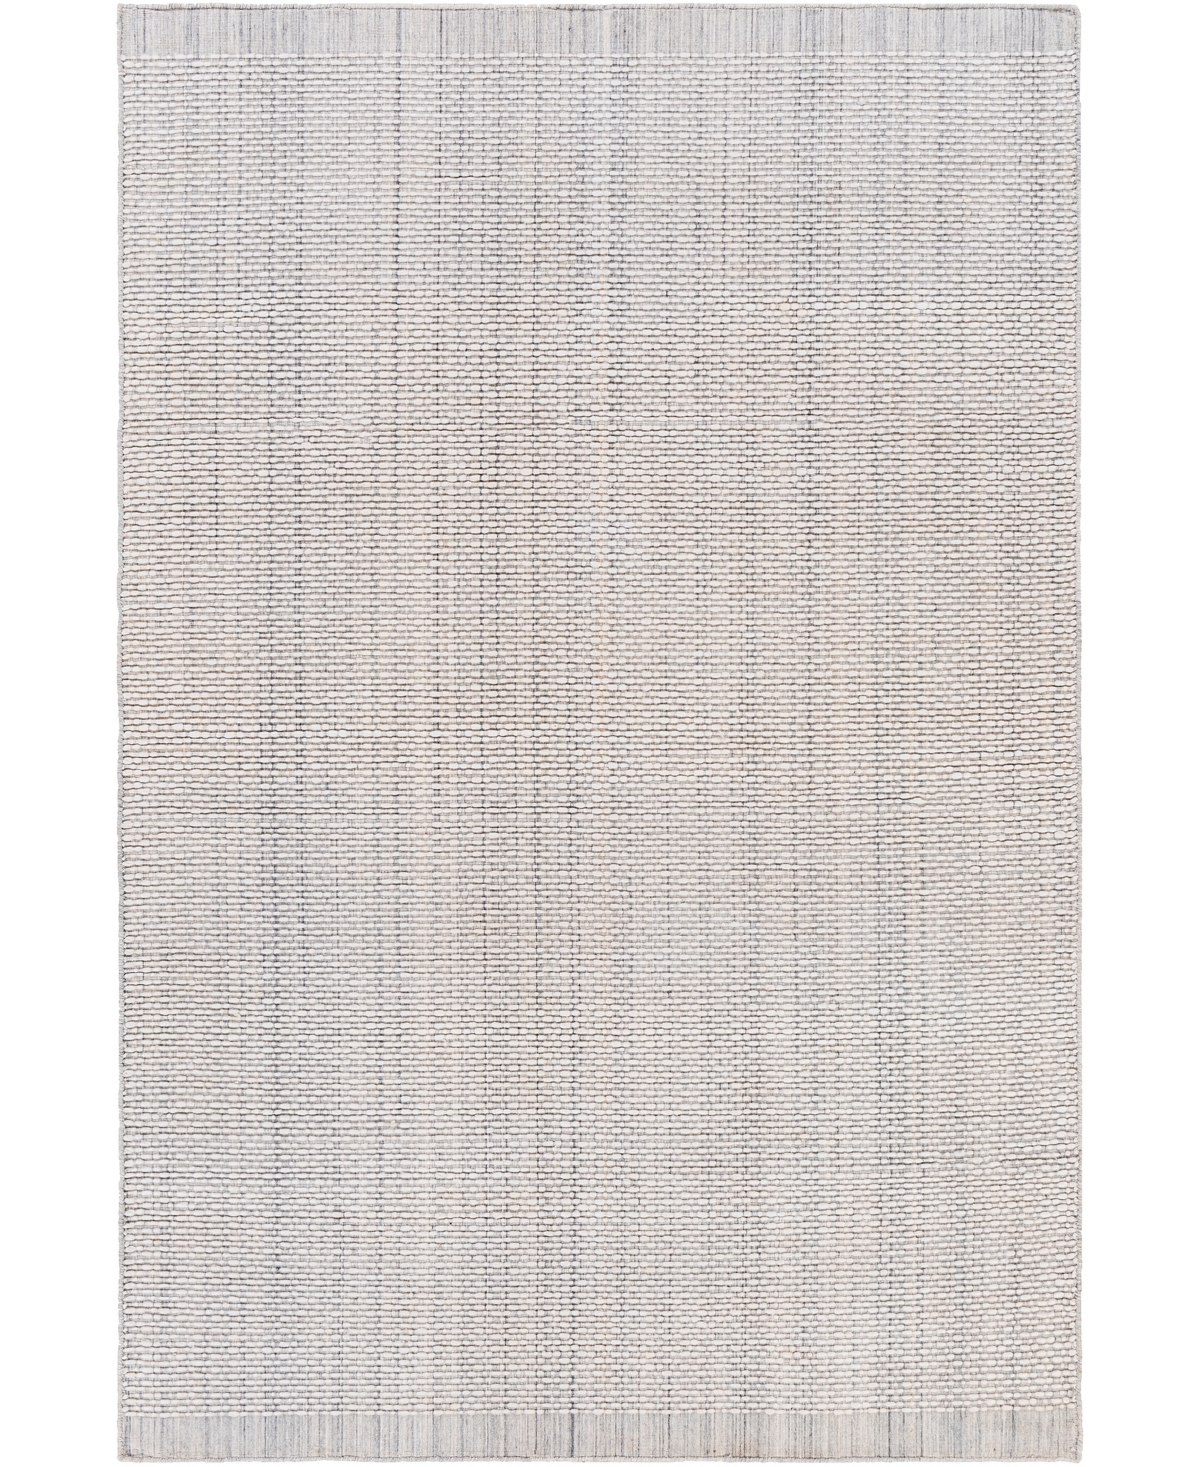 Surya Sycamore Syc-2300 8in x 10' Outdoor Area Rug - White, Gray